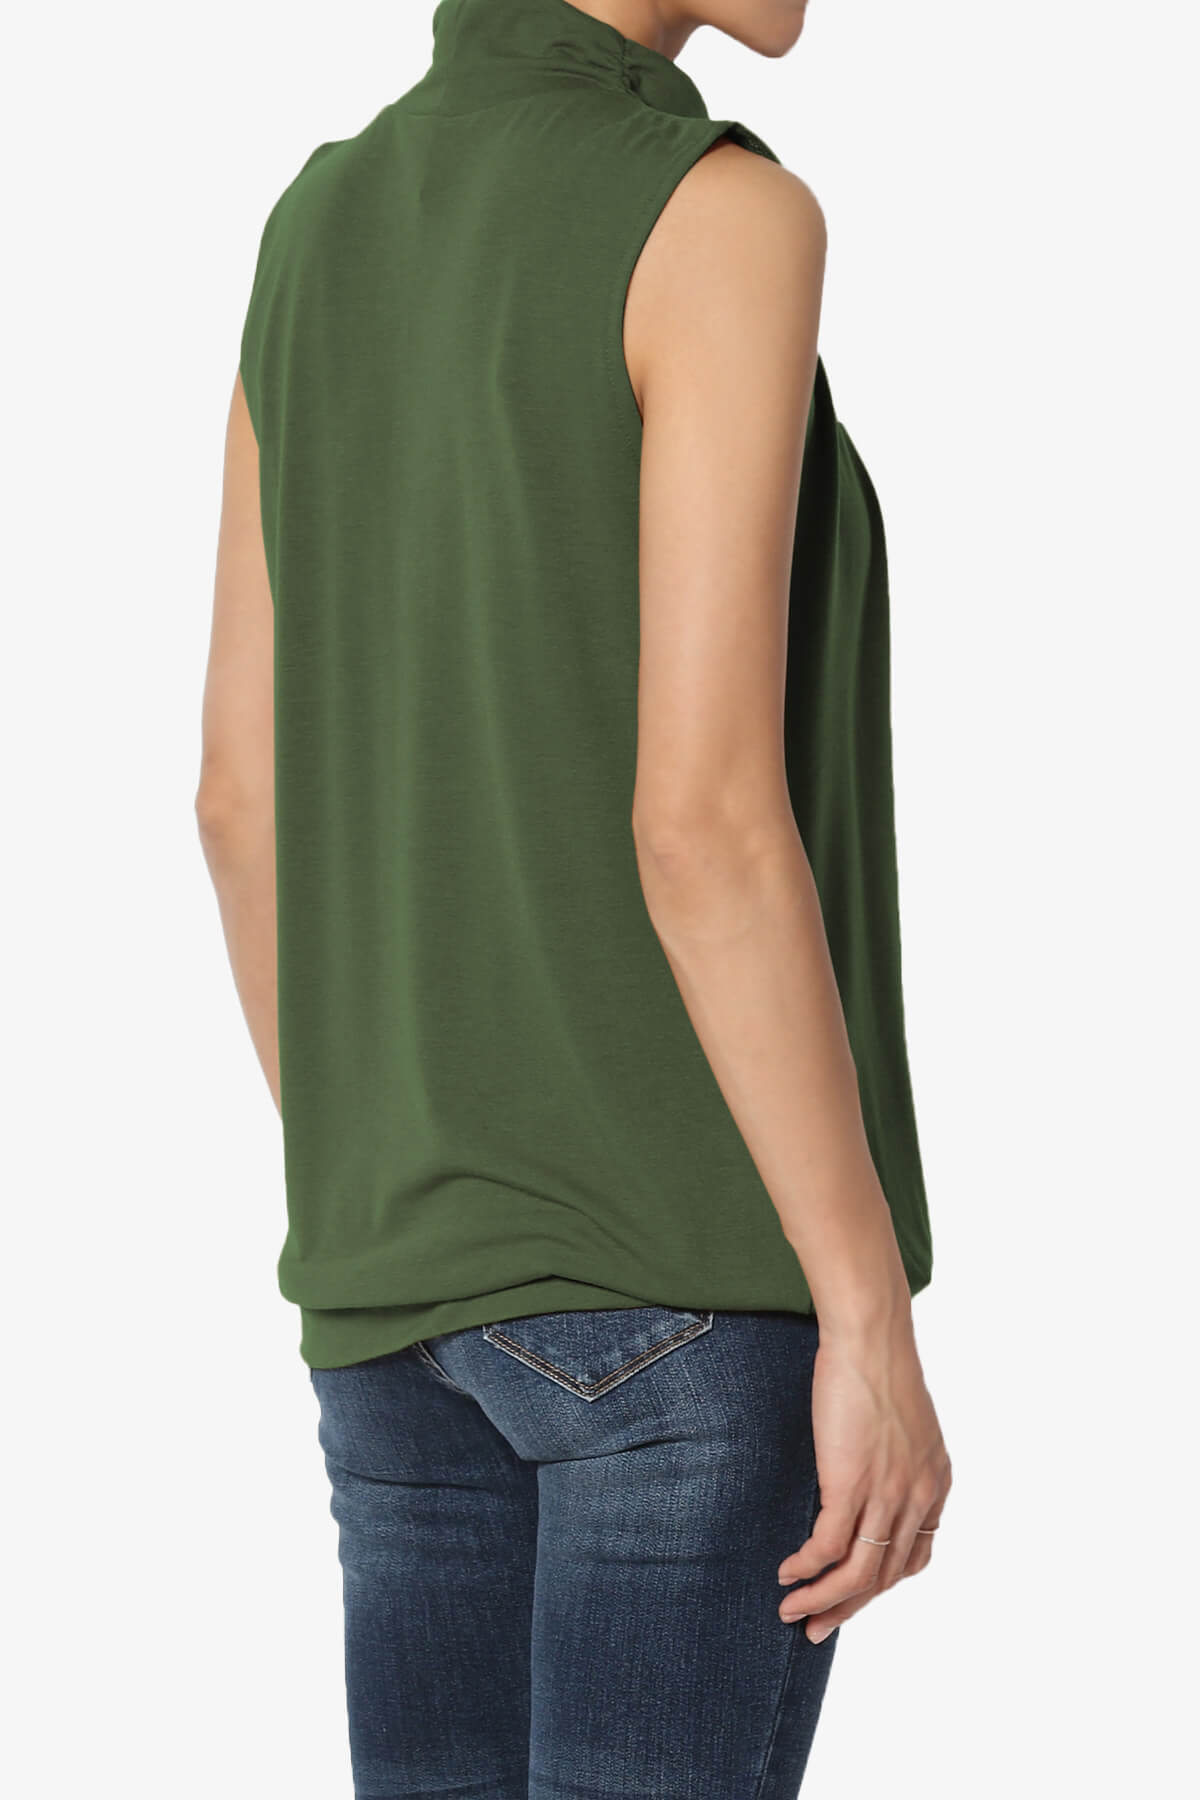 Load image into Gallery viewer, Jibbitz Sleeveless Mock Neck Pleated Top ARMY GREEN_4
